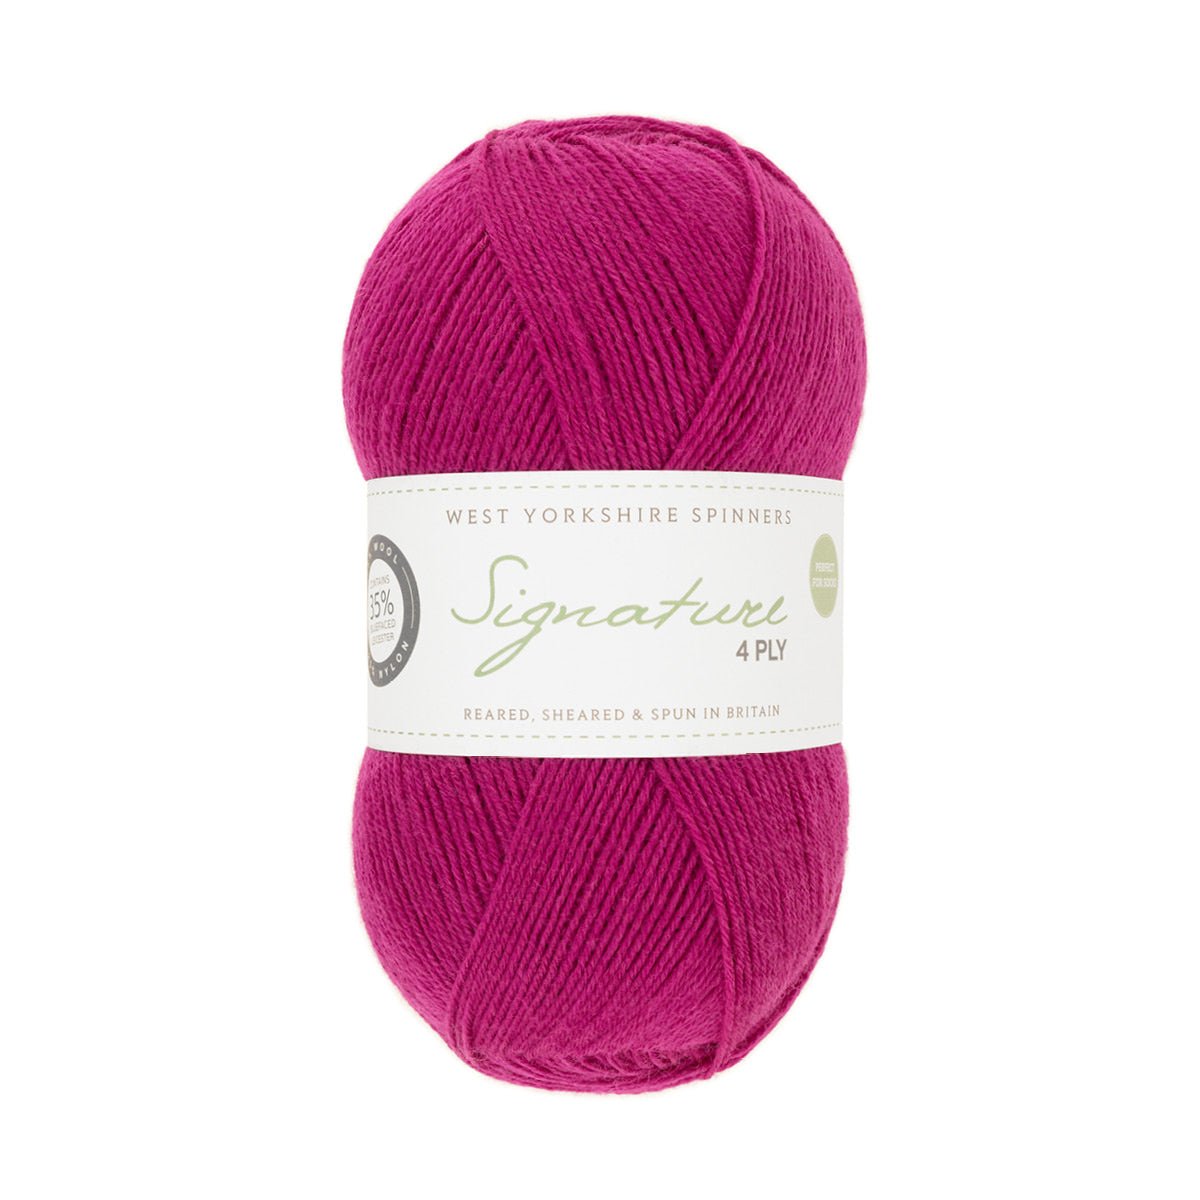 SIGNATURE 4PLY - HAPPY FEET COLLECTION 1002-Fuchsia - West Yorkshire Spinners